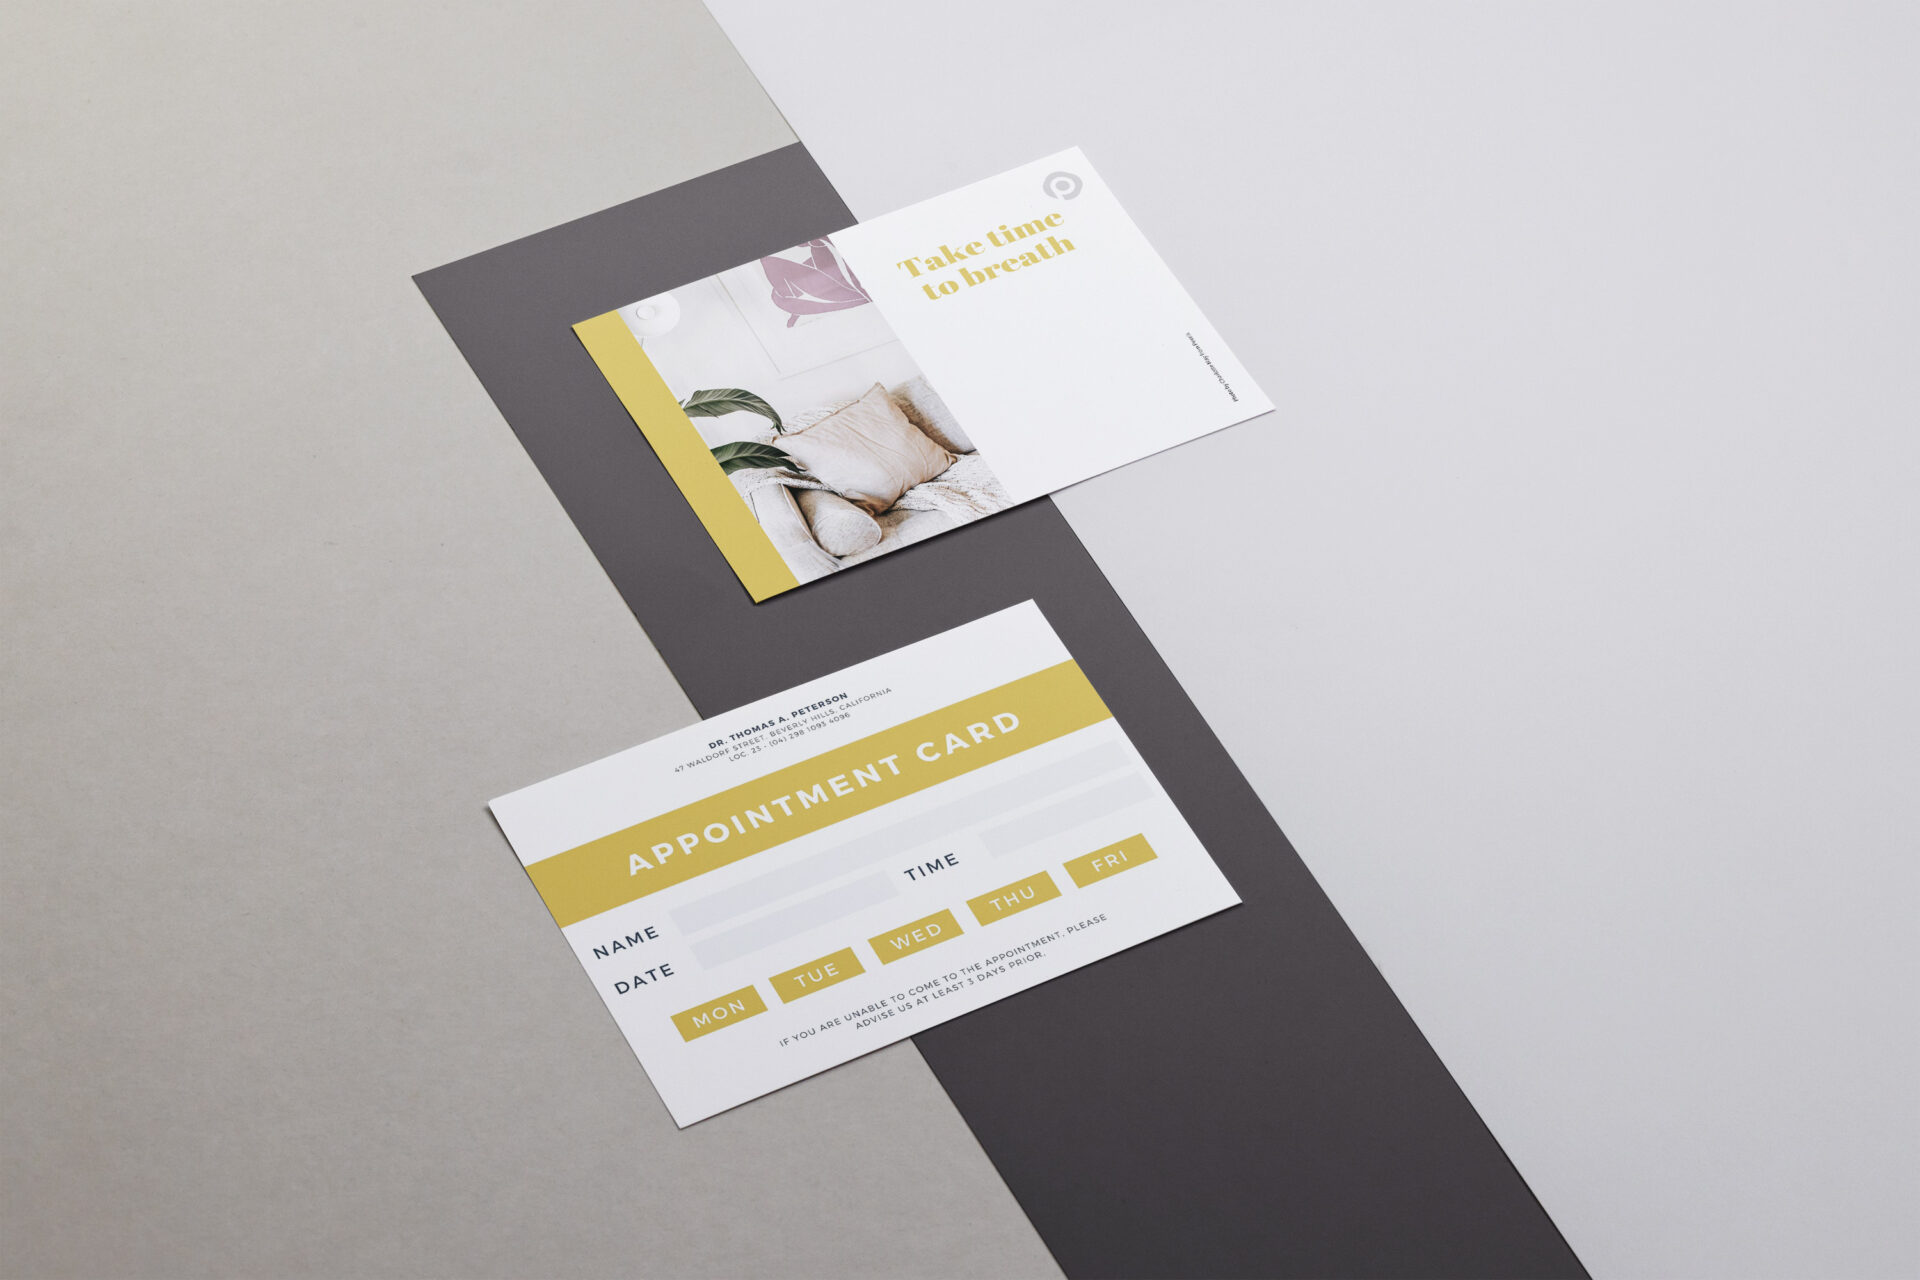 Appointment cards in Hamburg - Print with Pagerr